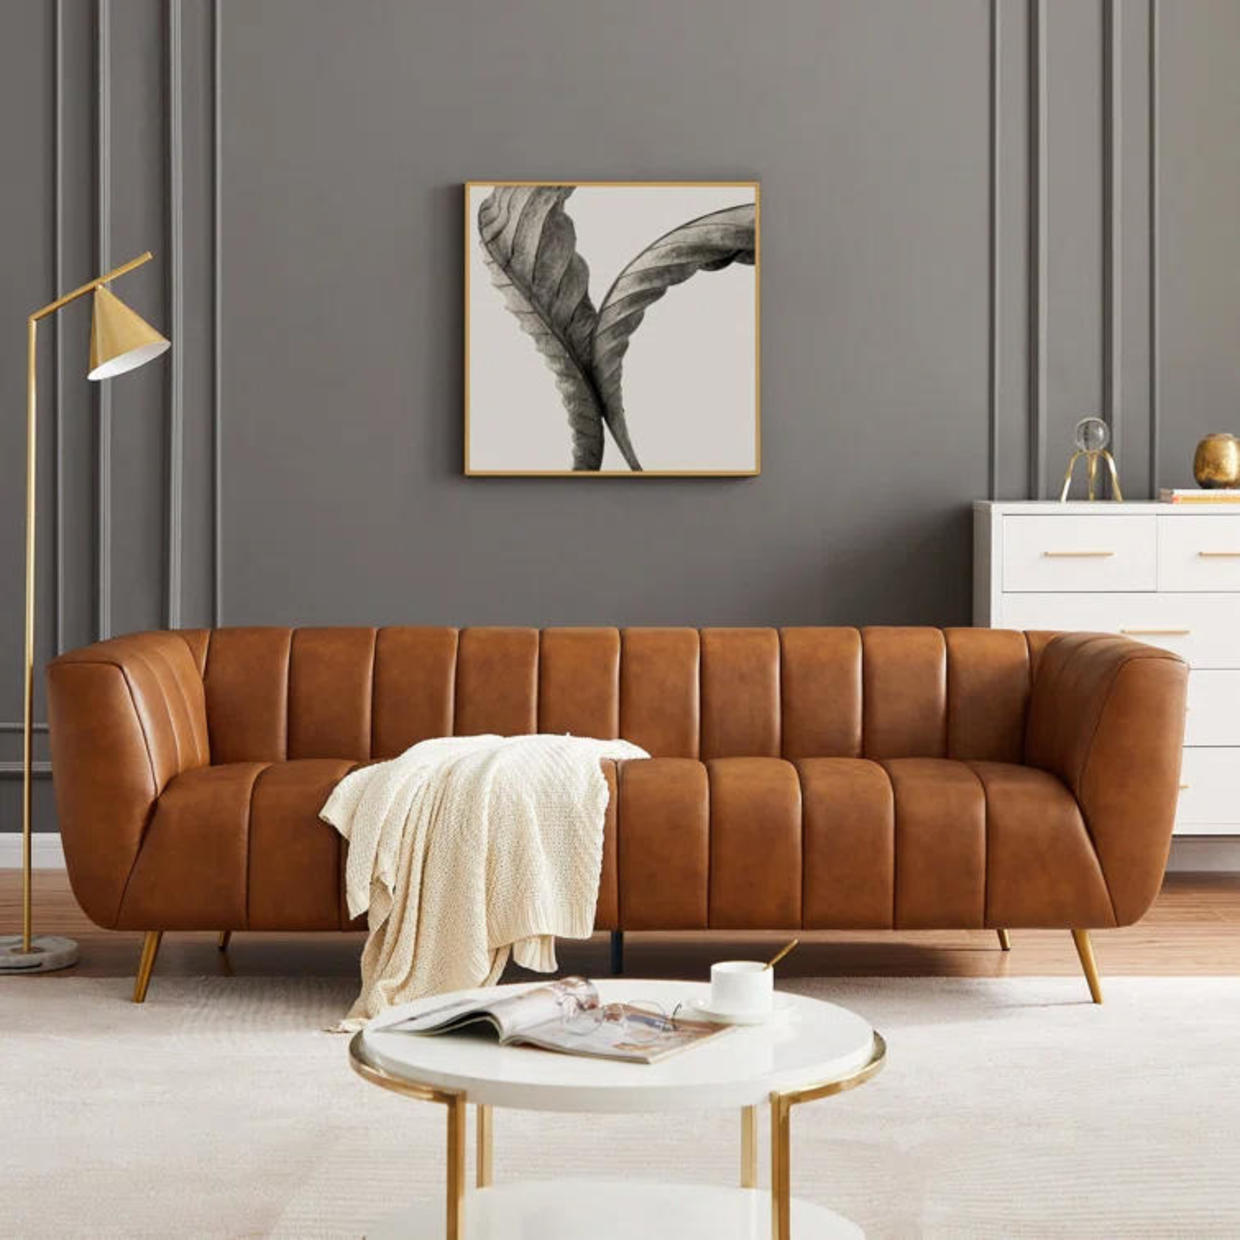 Best places to buy mid-century modern furniture online - Patabook News